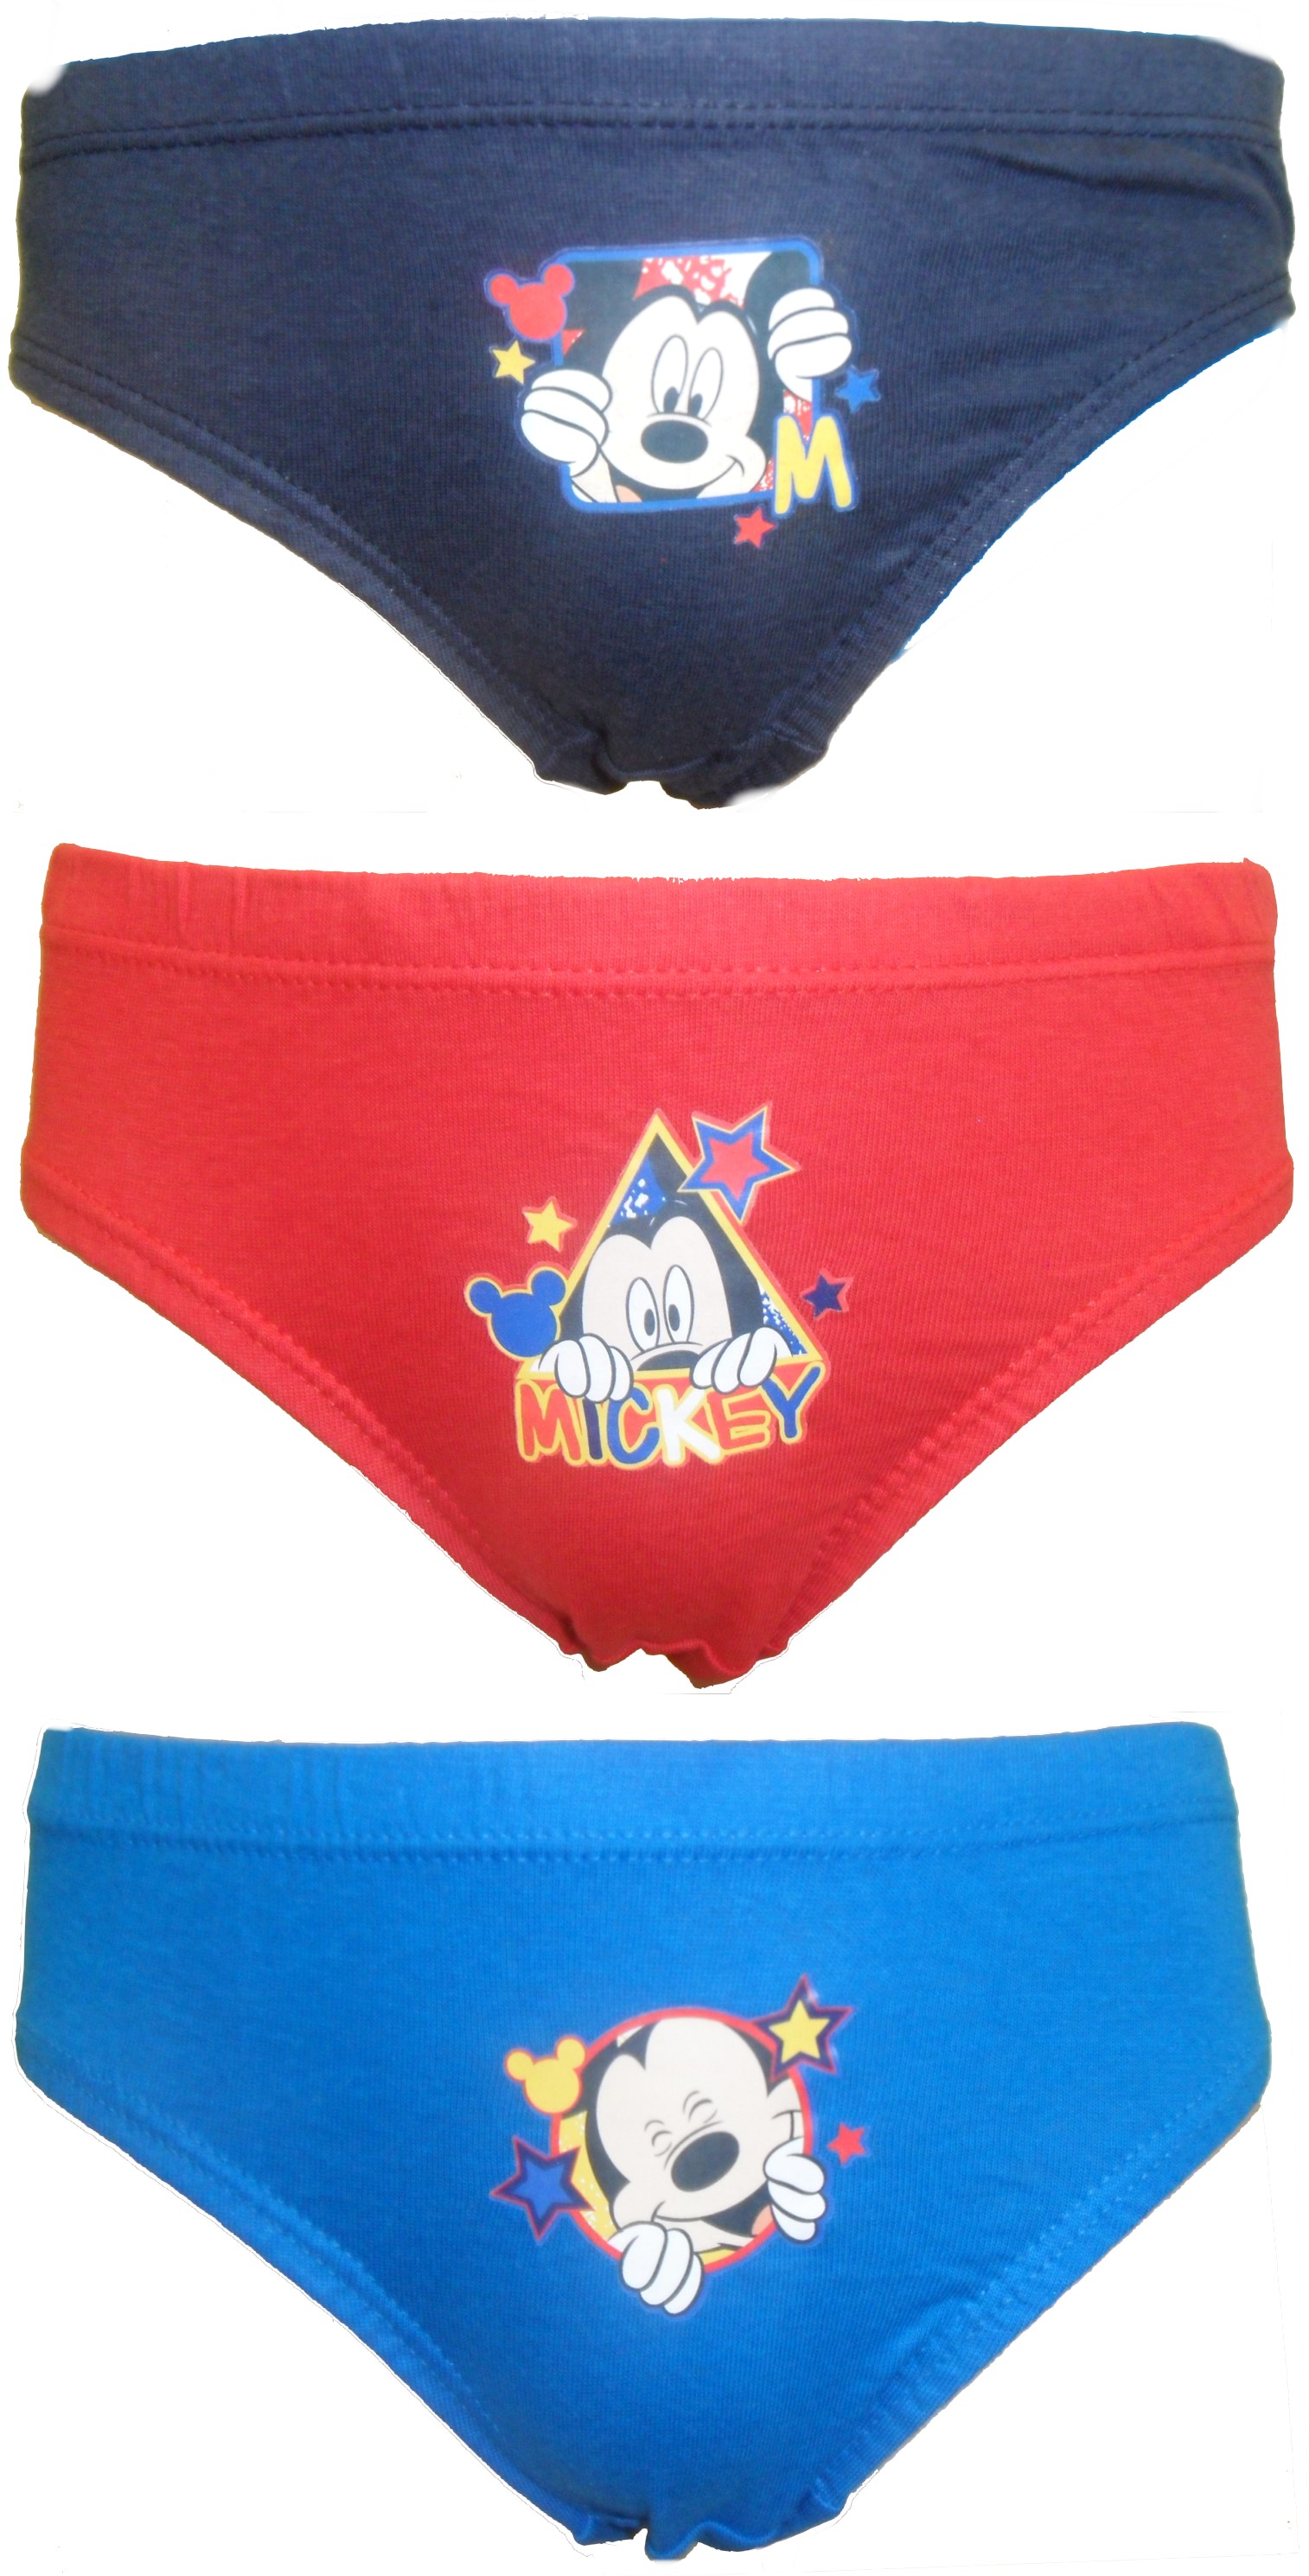 Mickey Mouse Briefs BUW05A.jpg  by Thingimijigs